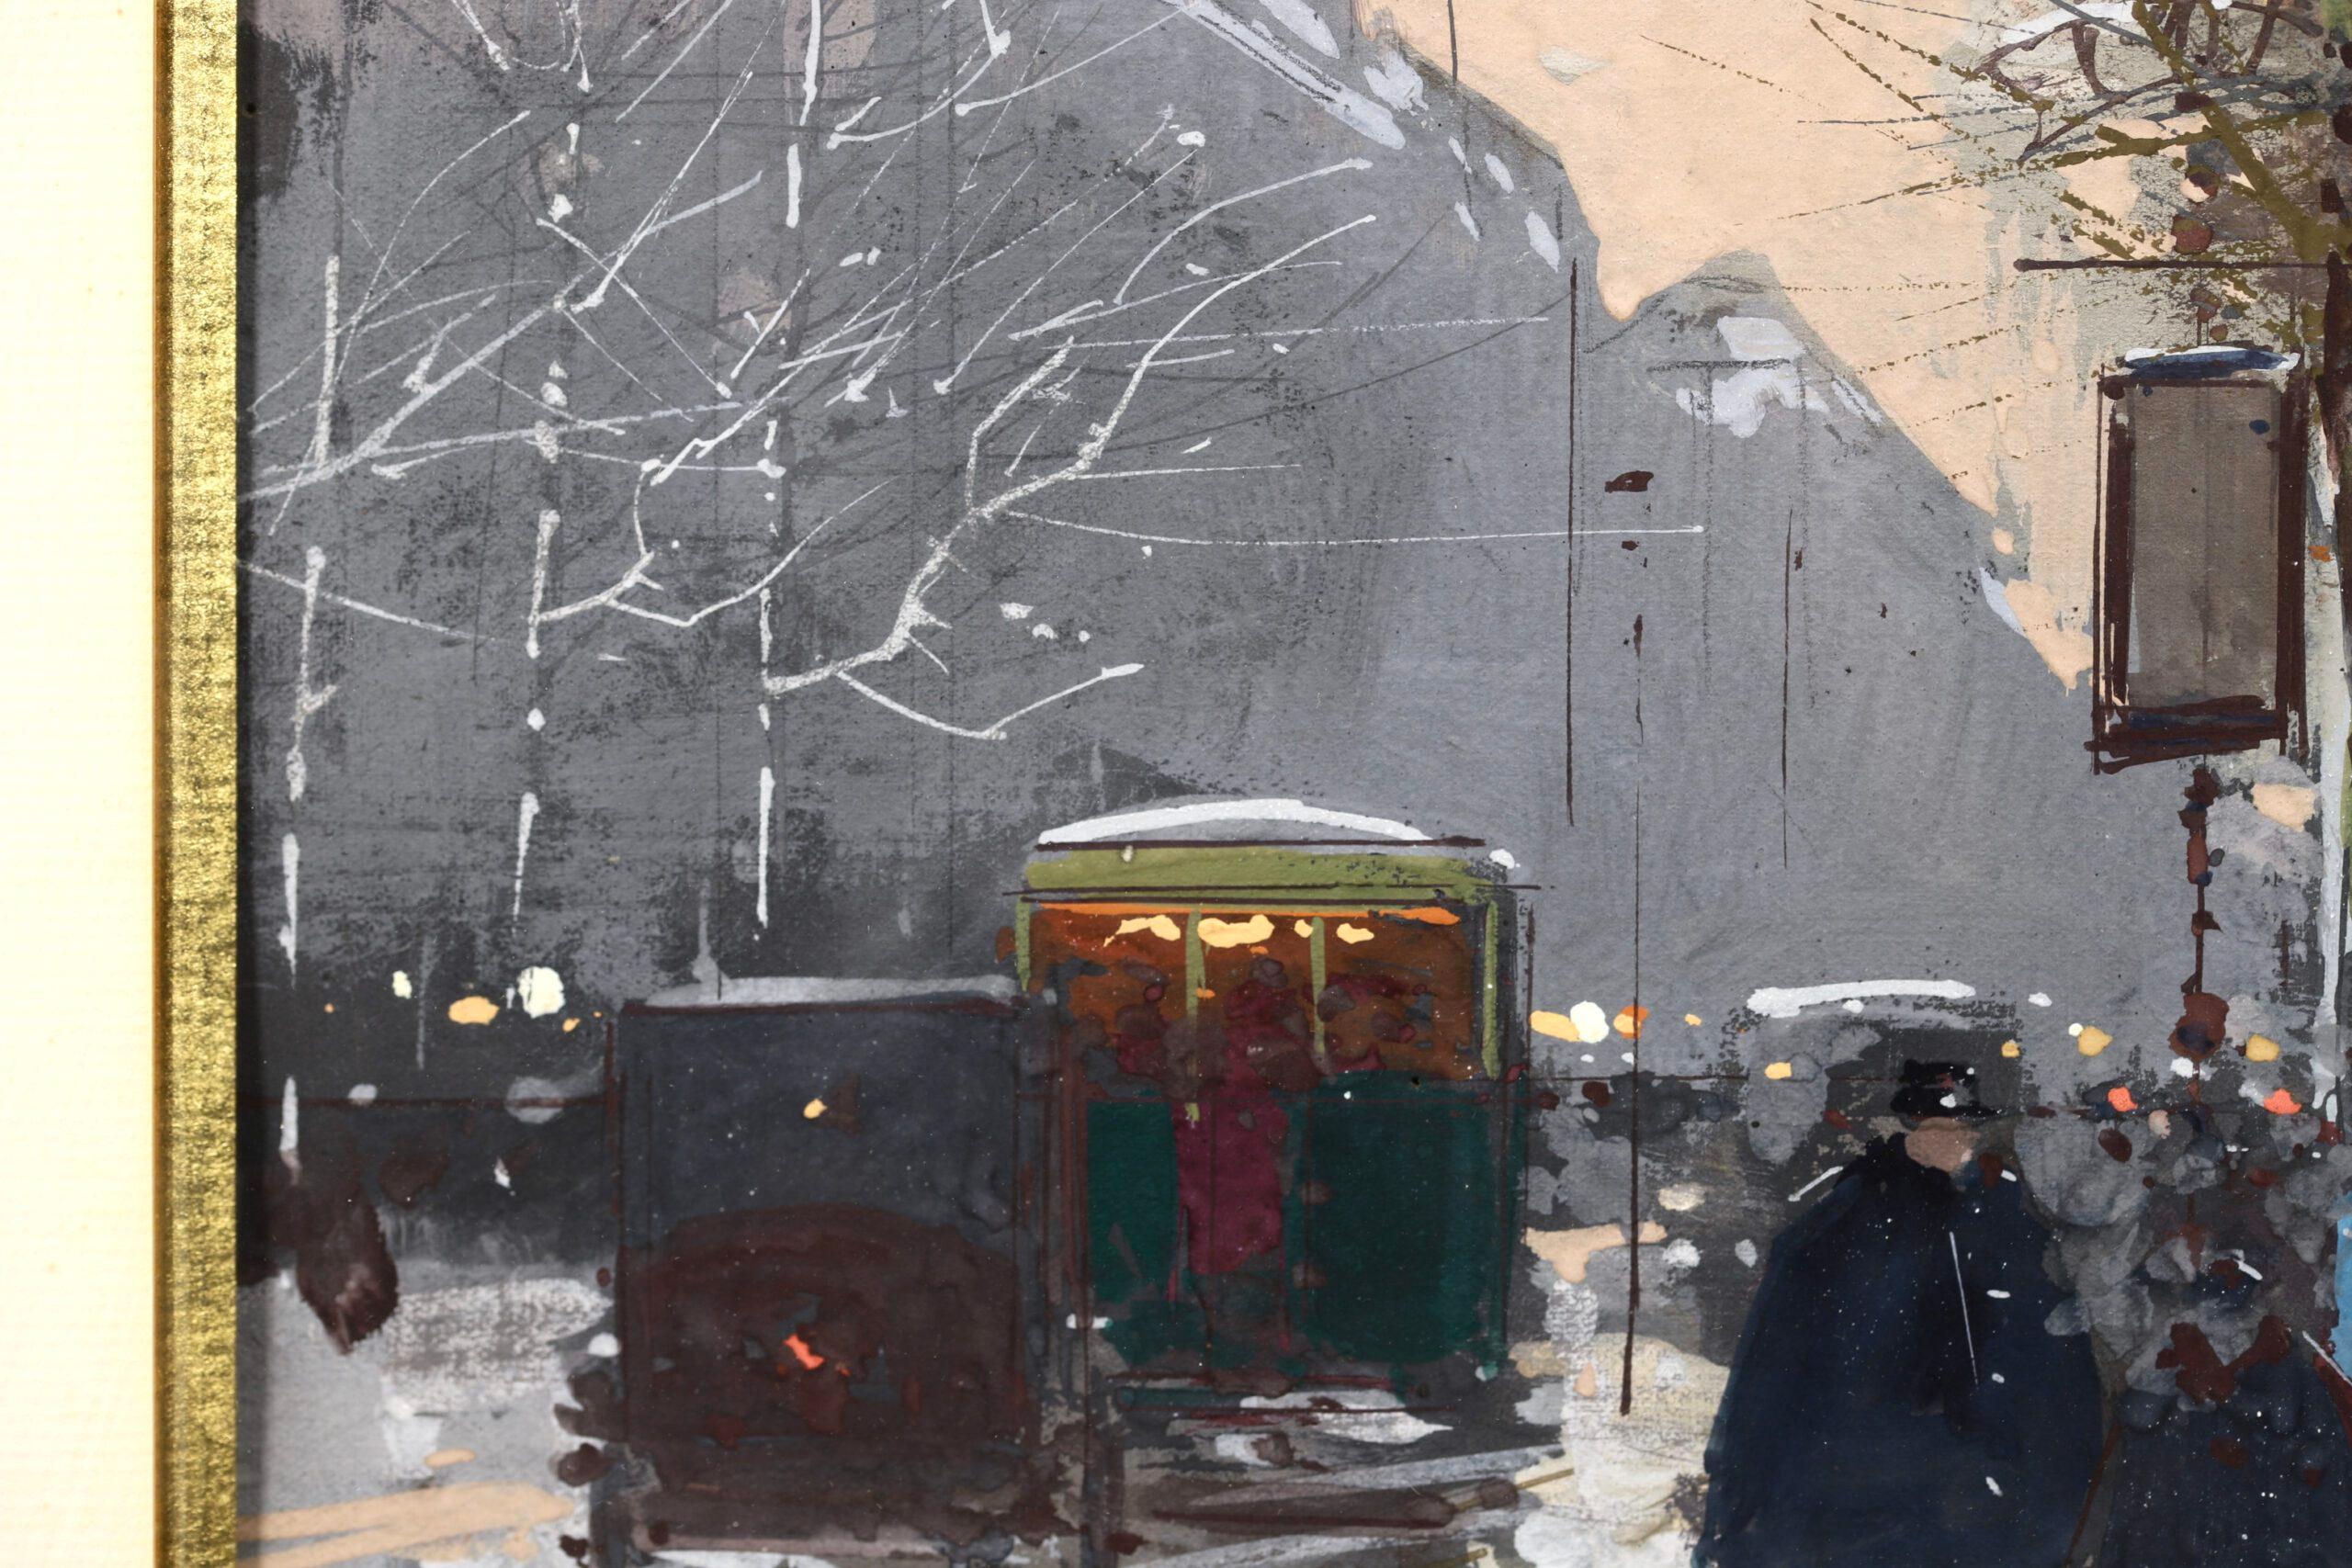 Winter - Porte St Denis - Impressionist Cityscape Painting by Edouard Cortes 11